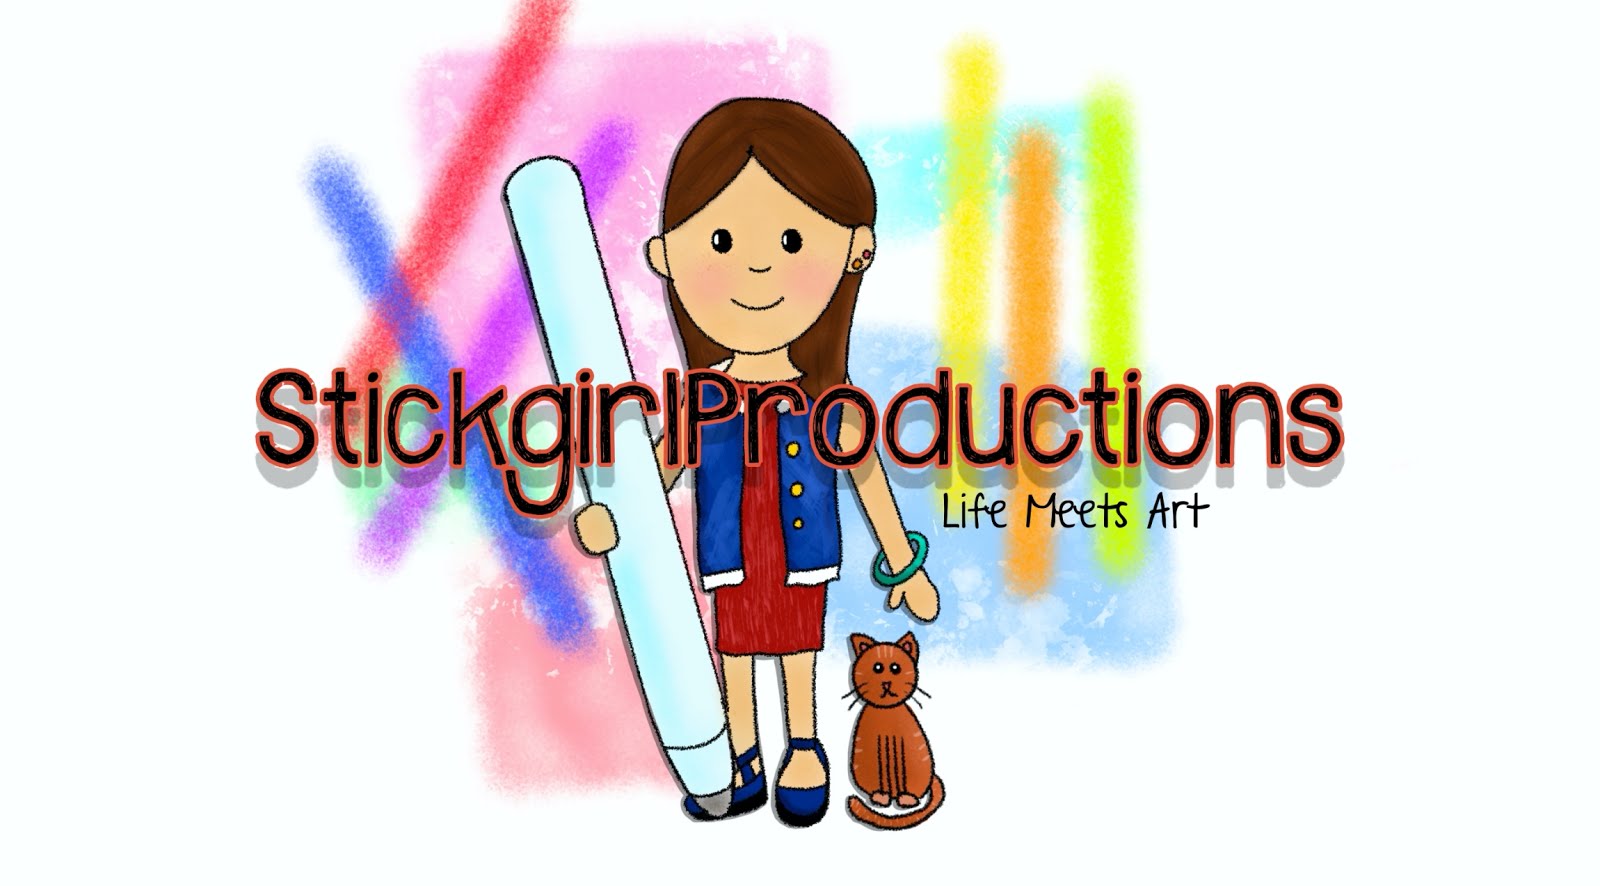 StickgirlProductions